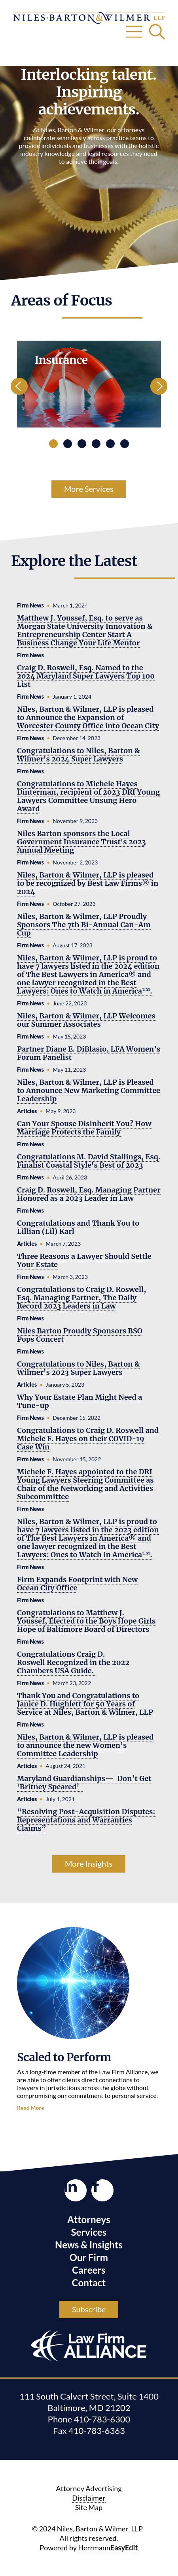 Niles, Barton & Wilmer, LLP - Baltimore MD Lawyers